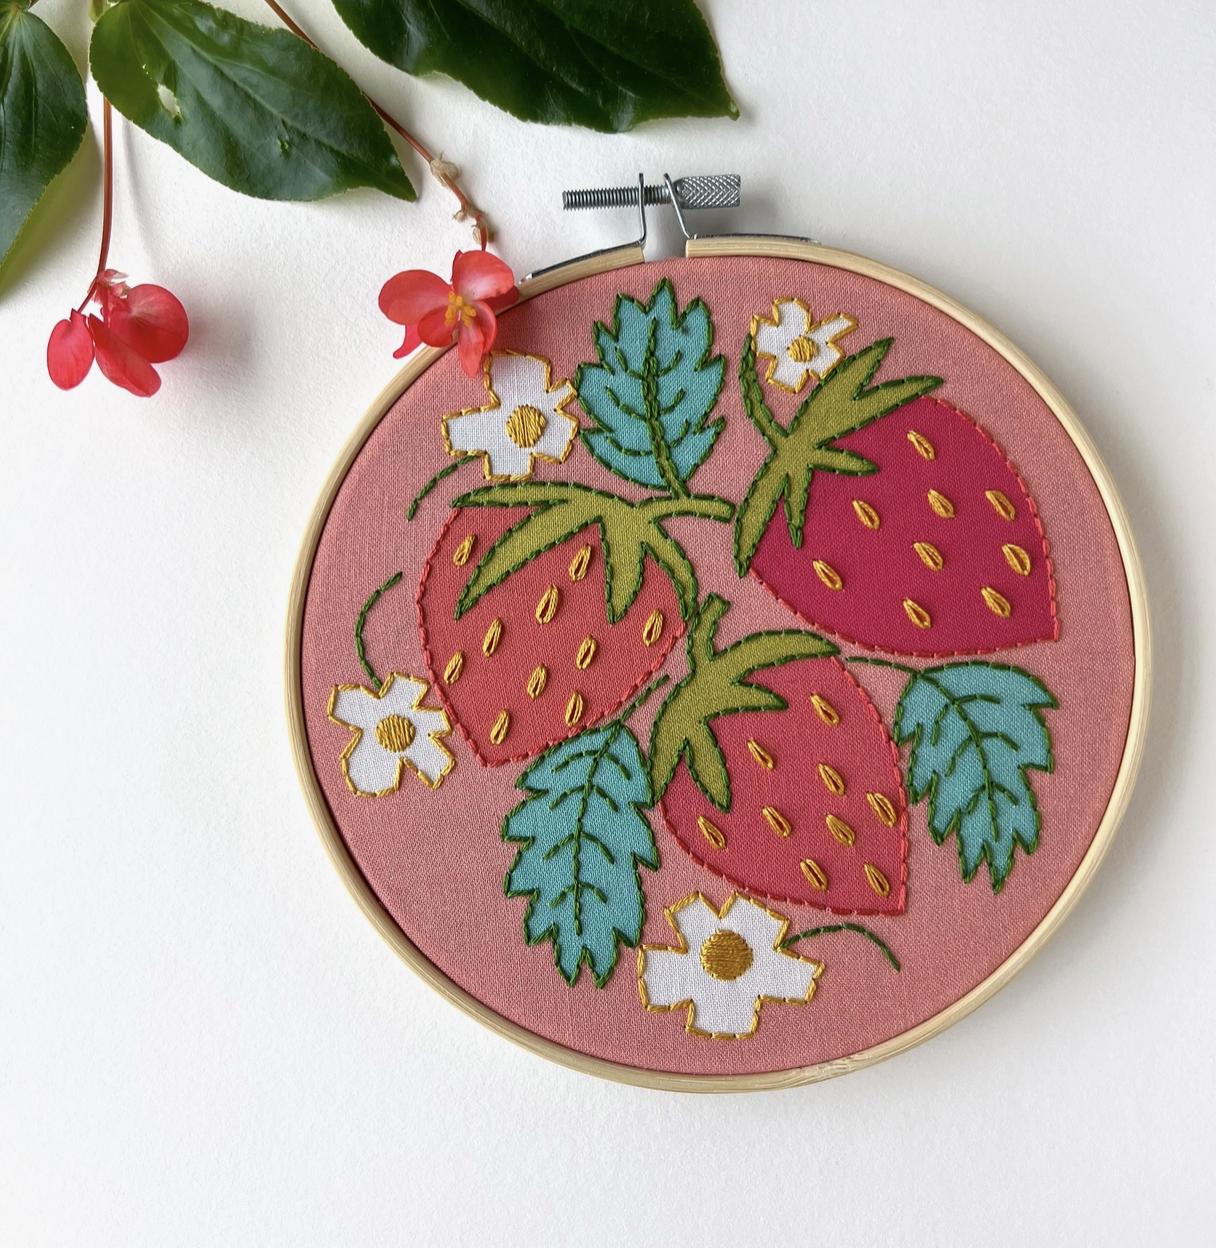 DIY - Embroidery - Strawberries